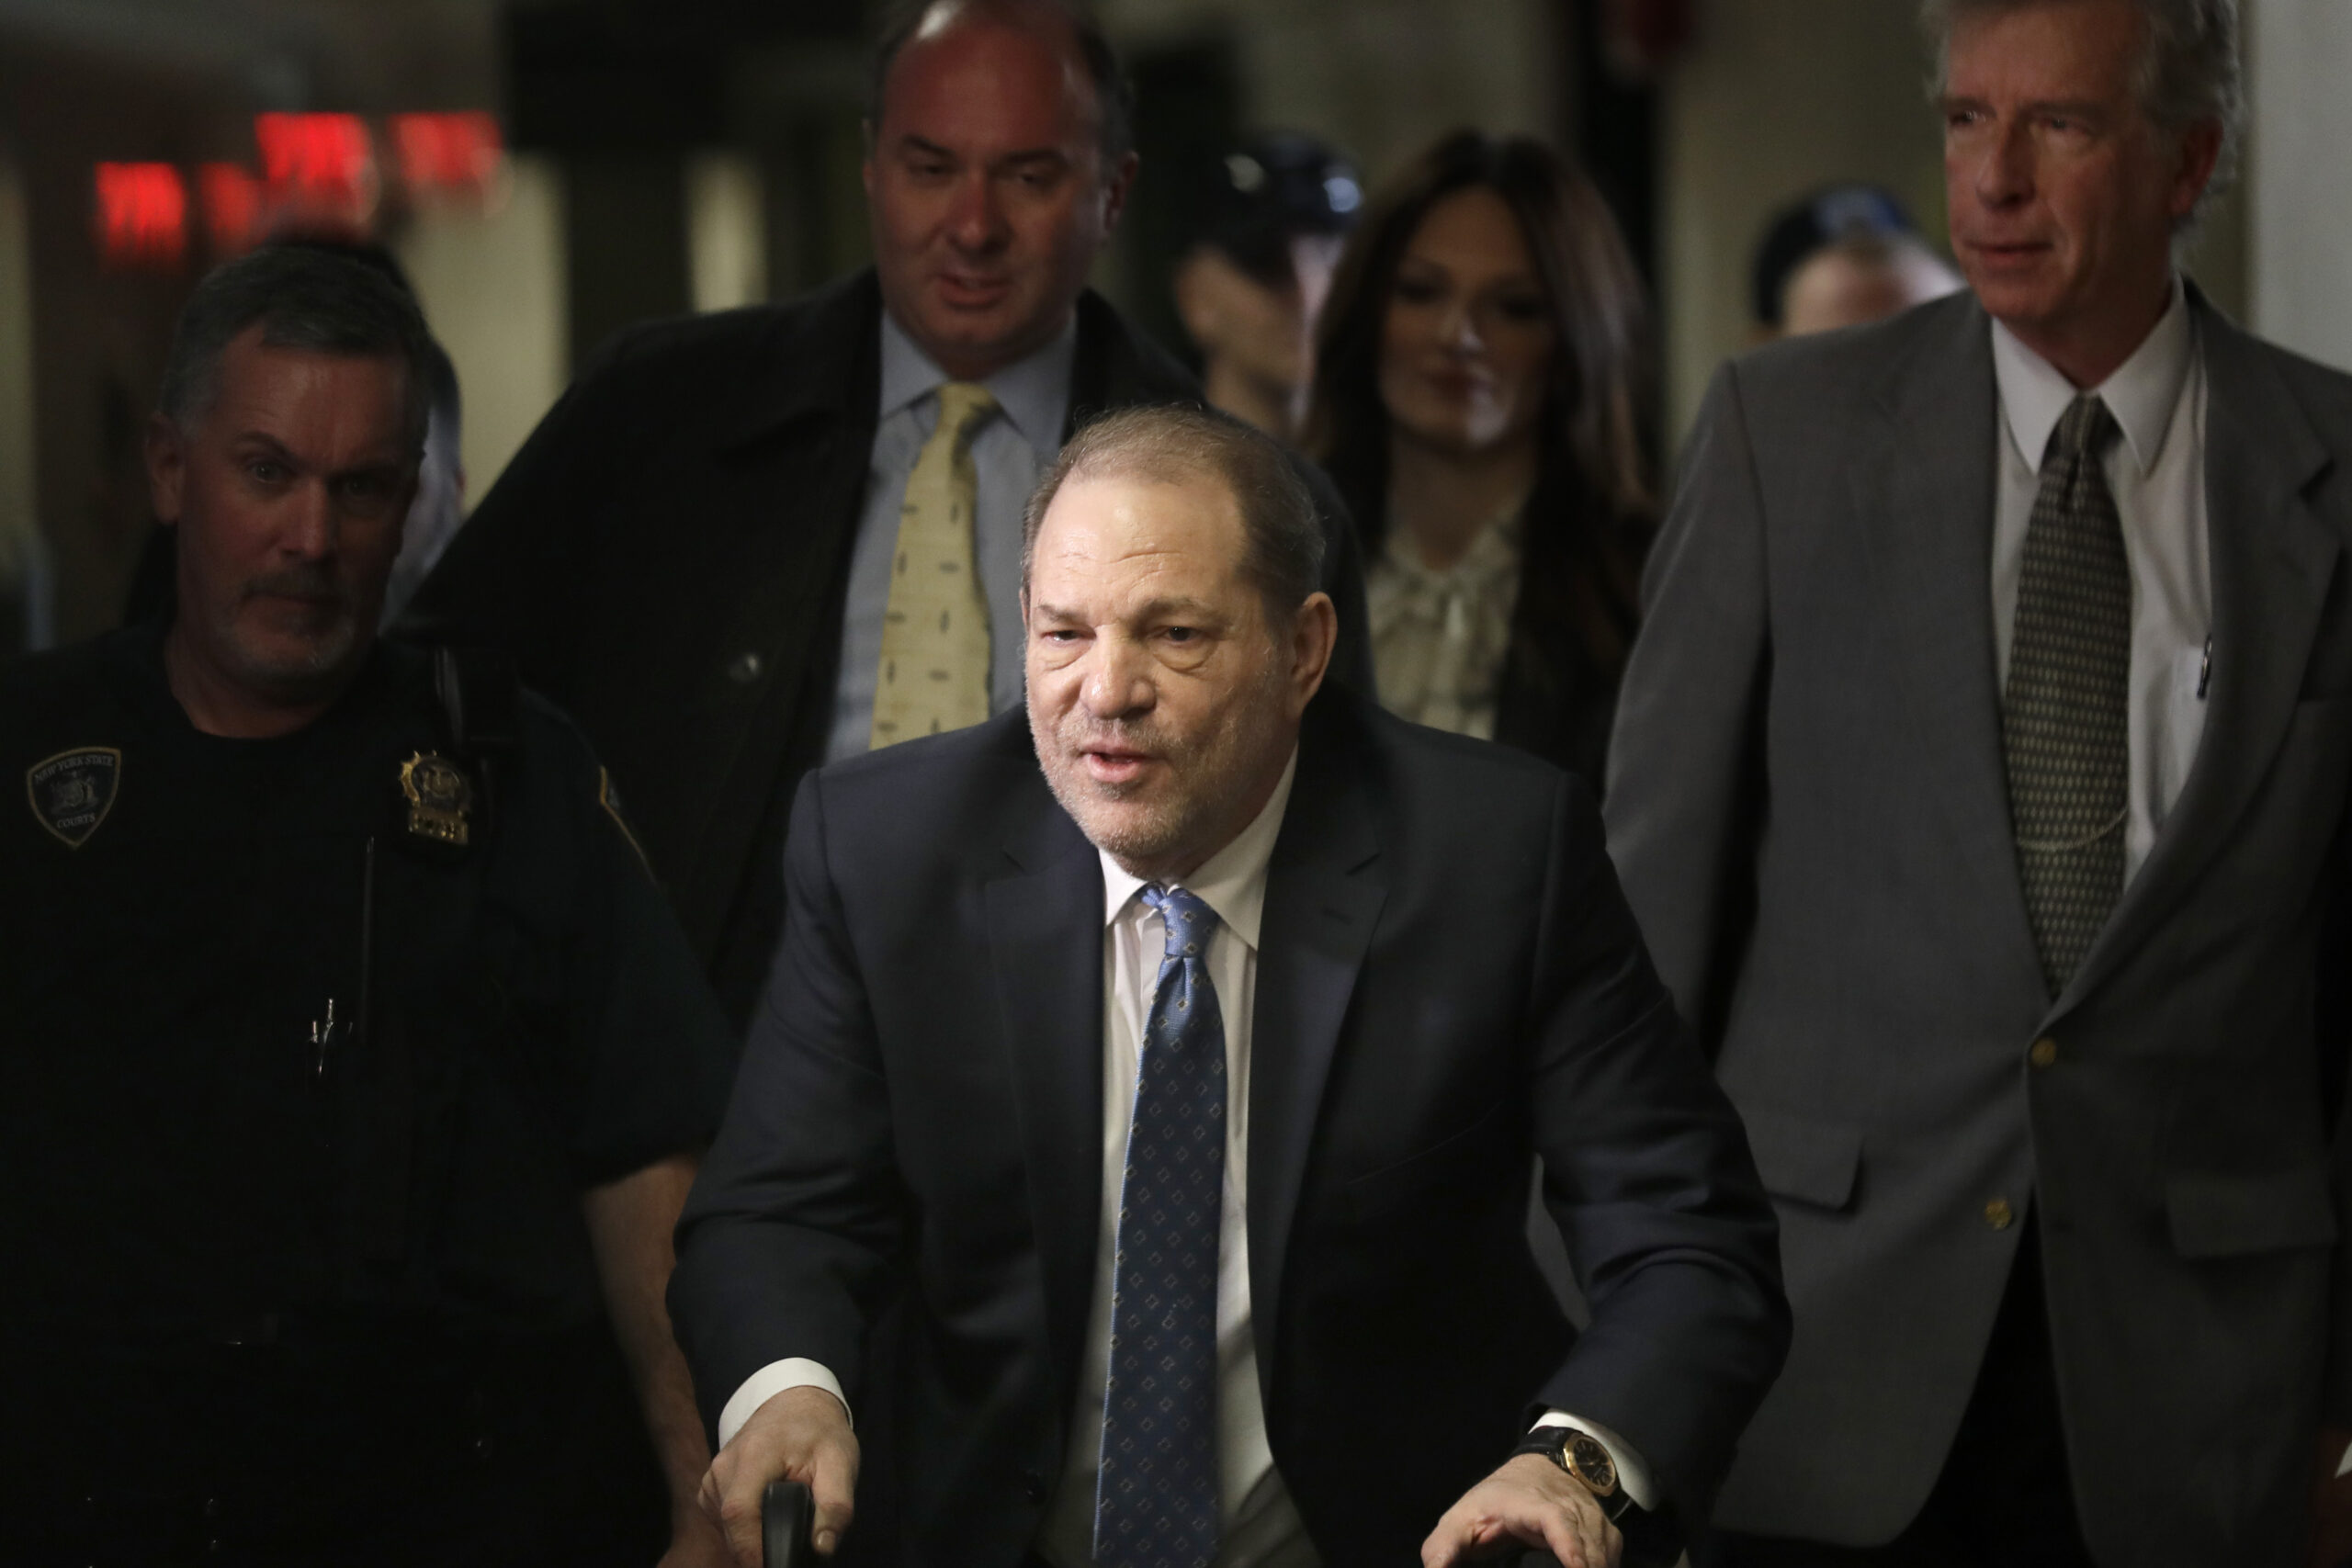 FILE - In this Feb. 24, 2020 file photo, Harvey Weinstein arrives at a Manhattan courthouse for jury deliberations in his rape trial in New York. New York prison officials have handed over Weinstein for transport to California to face sexual assault charges. The New York State Department of Corrections and Community Supervision says the transfer happened about 9:25 a.m. Tuesday, July 20, 2021. (AP Photo/Seth Wenig, File)